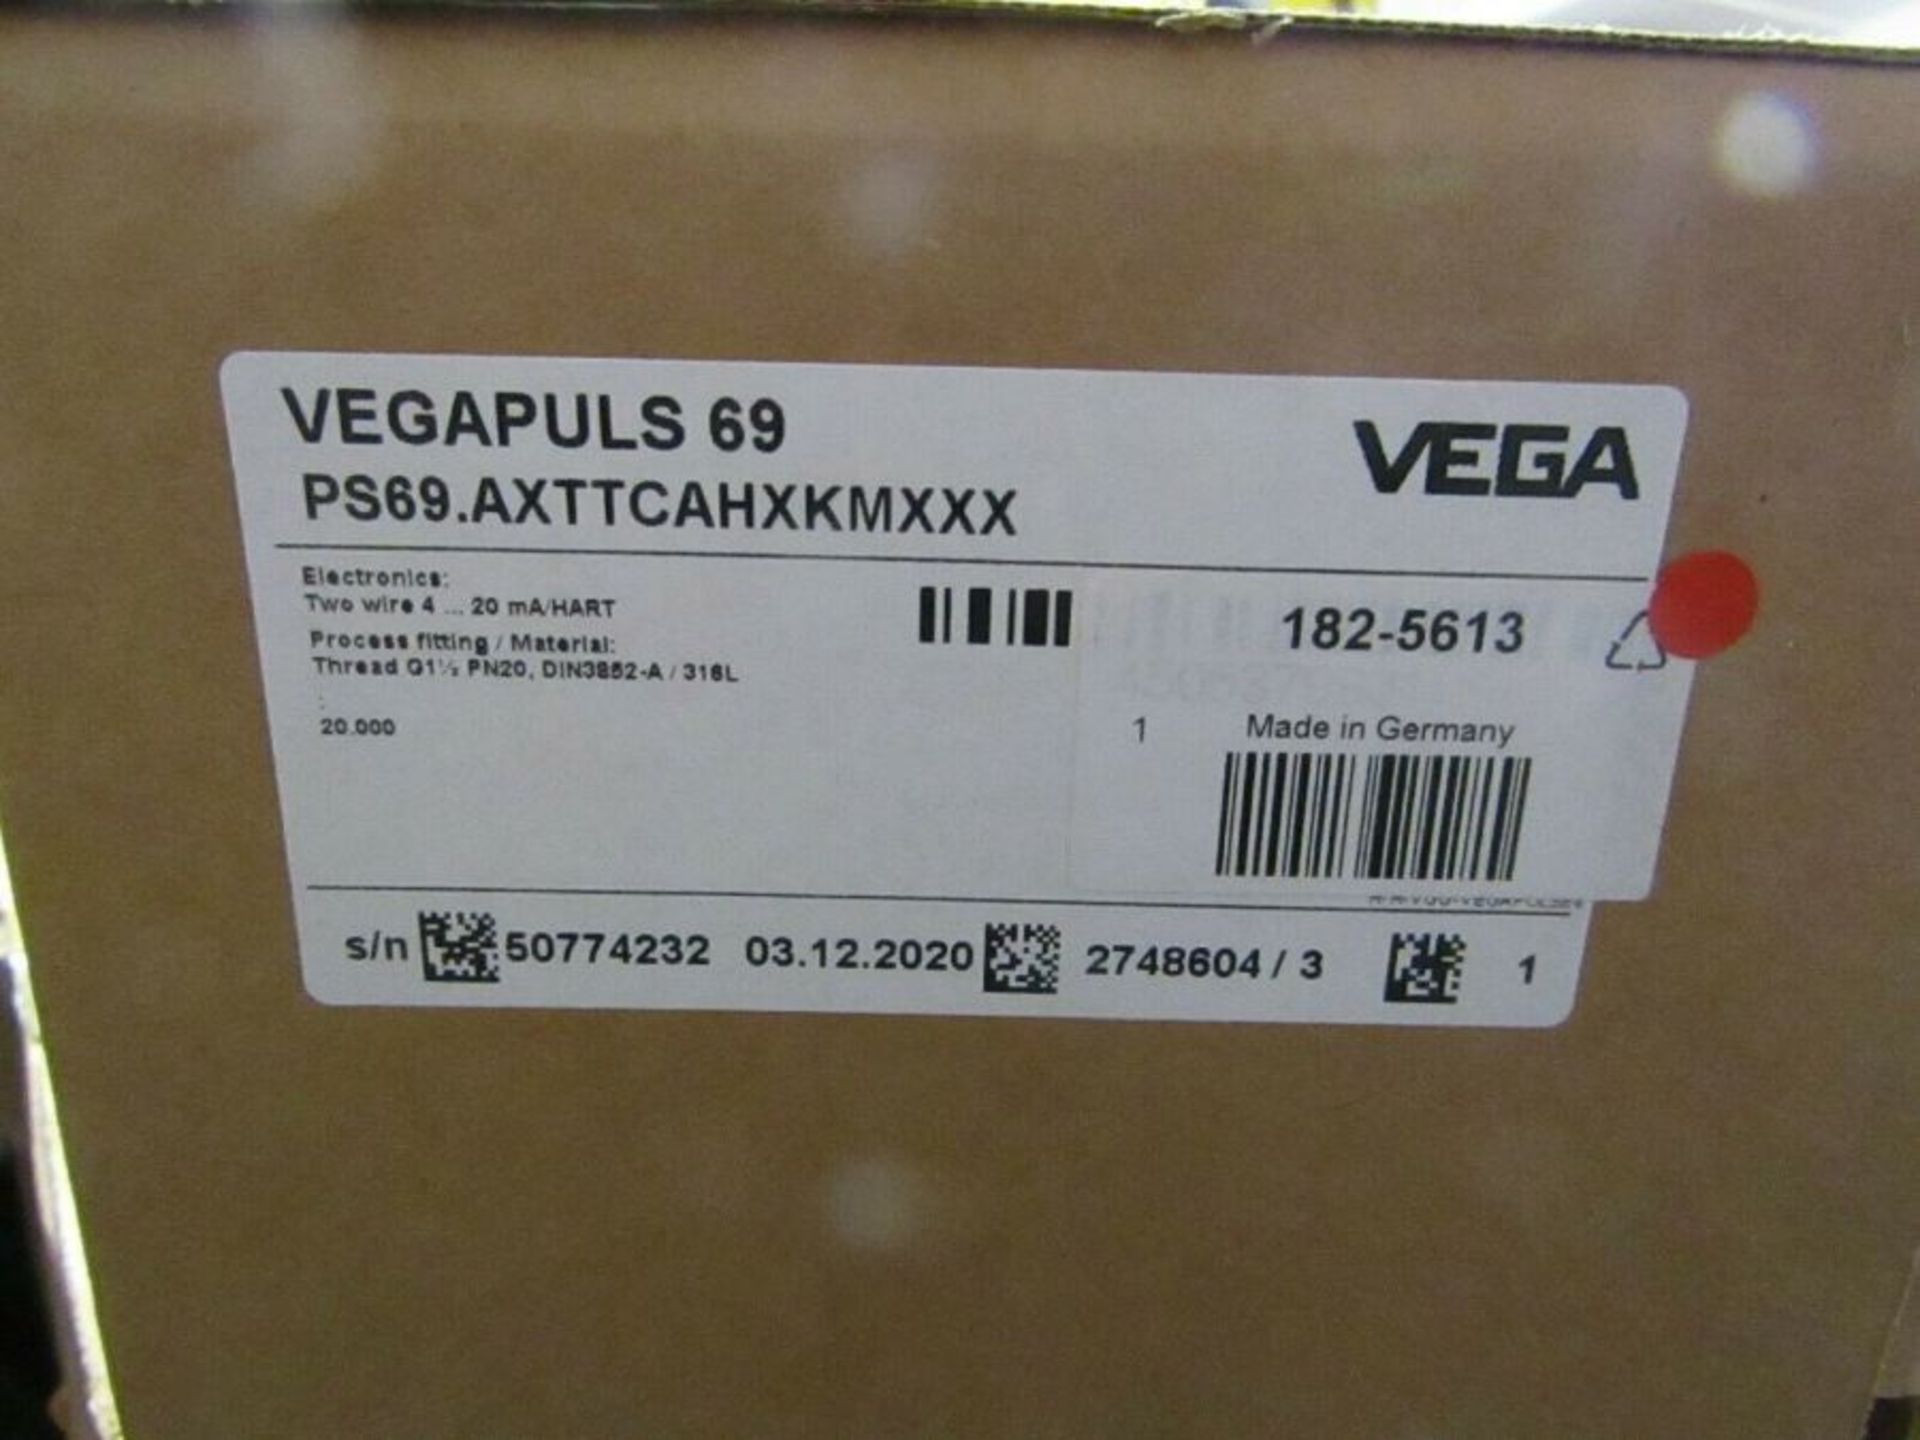 Vega VEGAPULS PS69 1.5 BSP/G Mounting Level Sensor 2 Wire 4-20mA Out J4 1825613 - Image 6 of 6